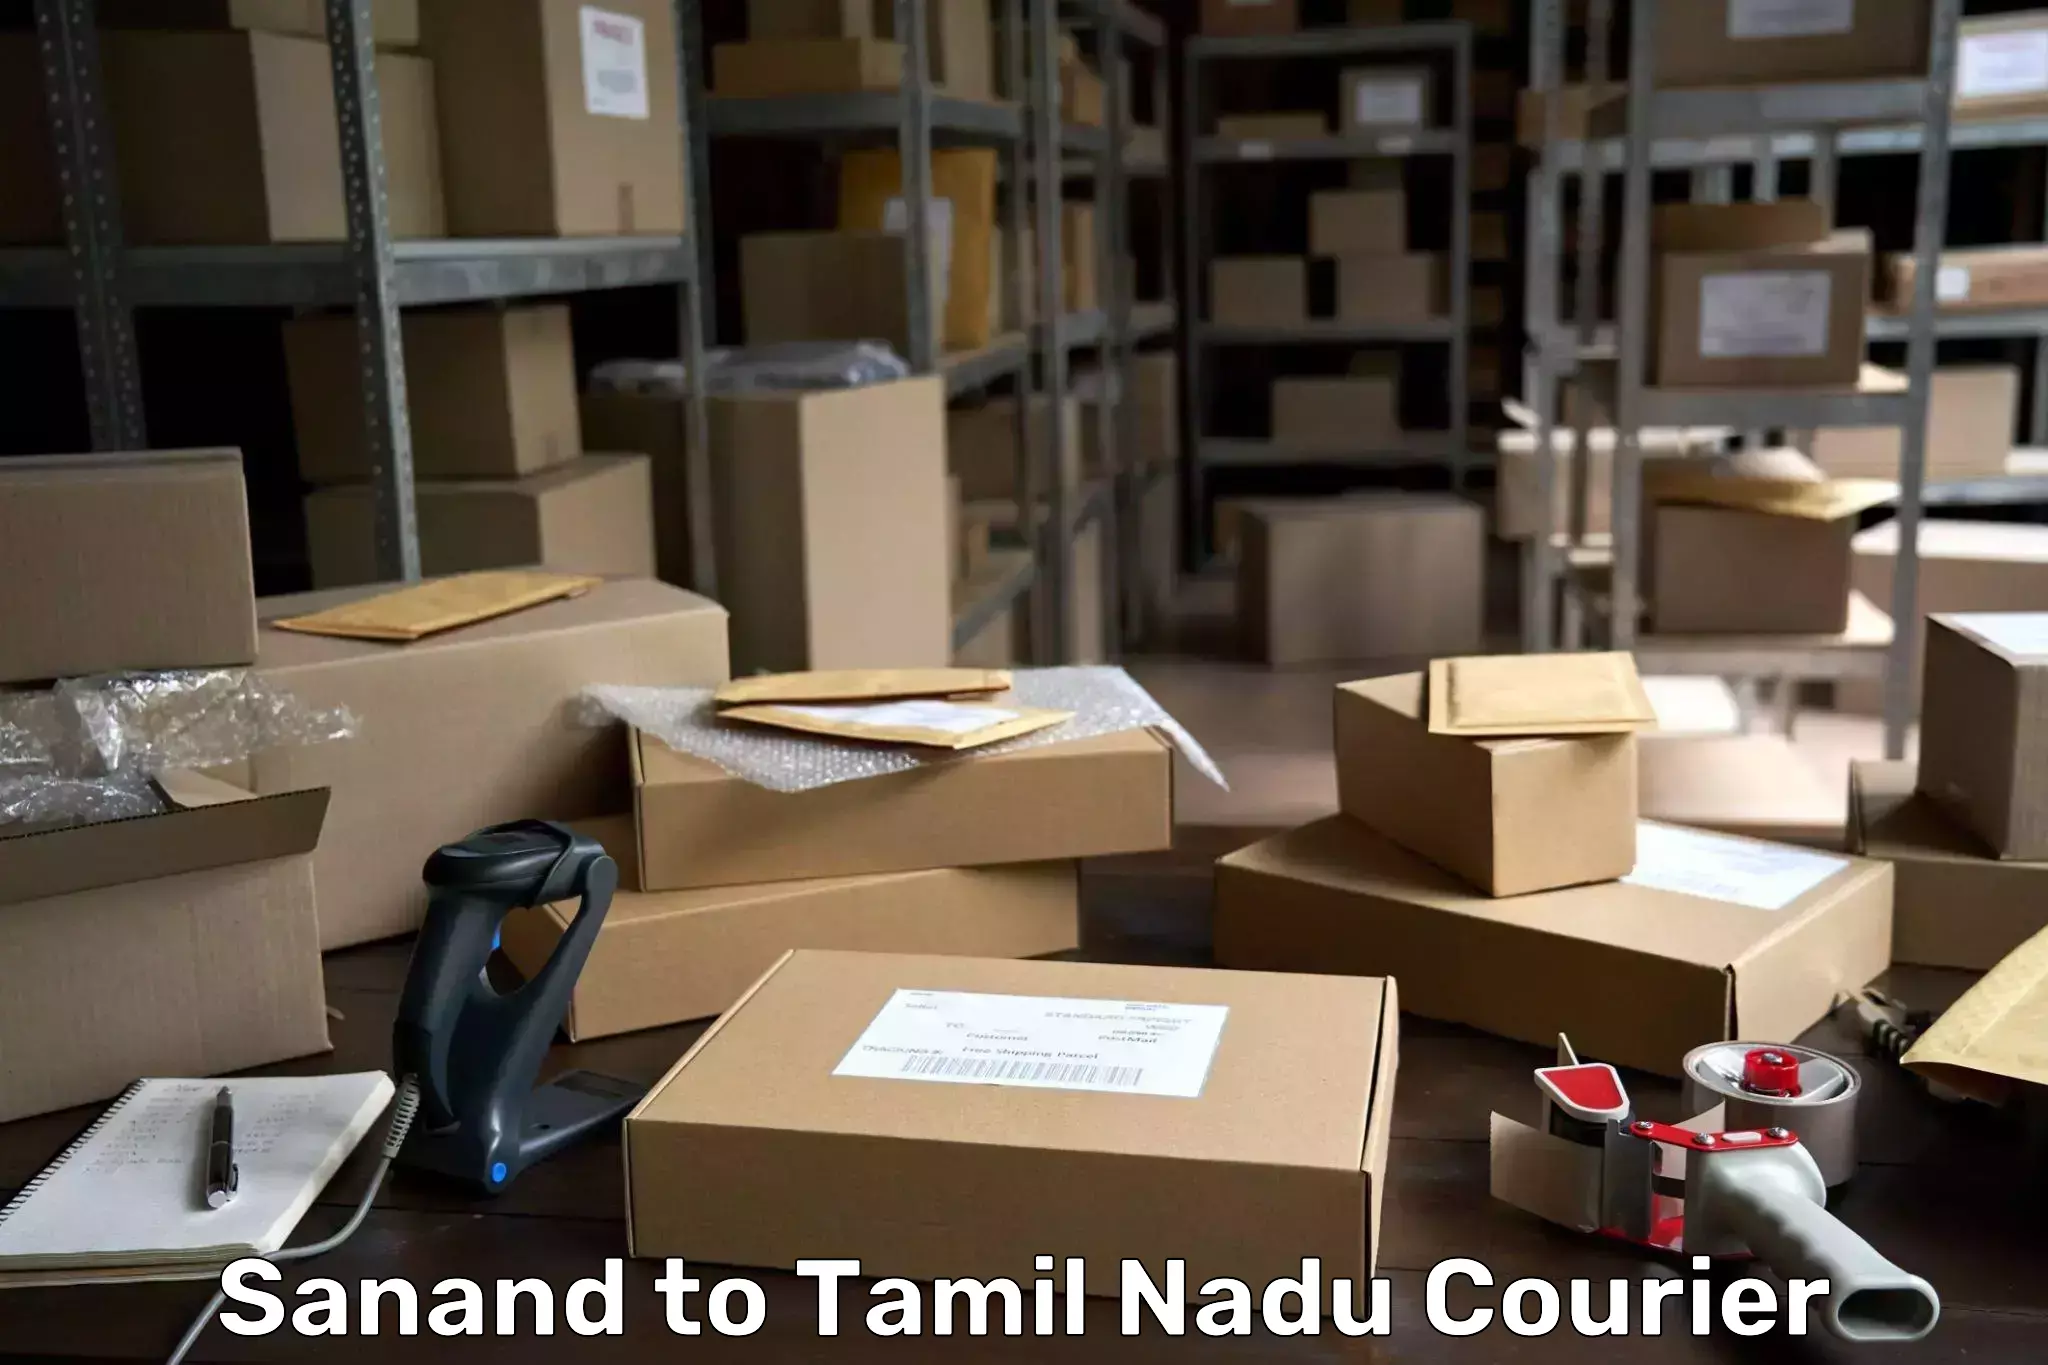 24-hour courier service Sanand to Tallakulam